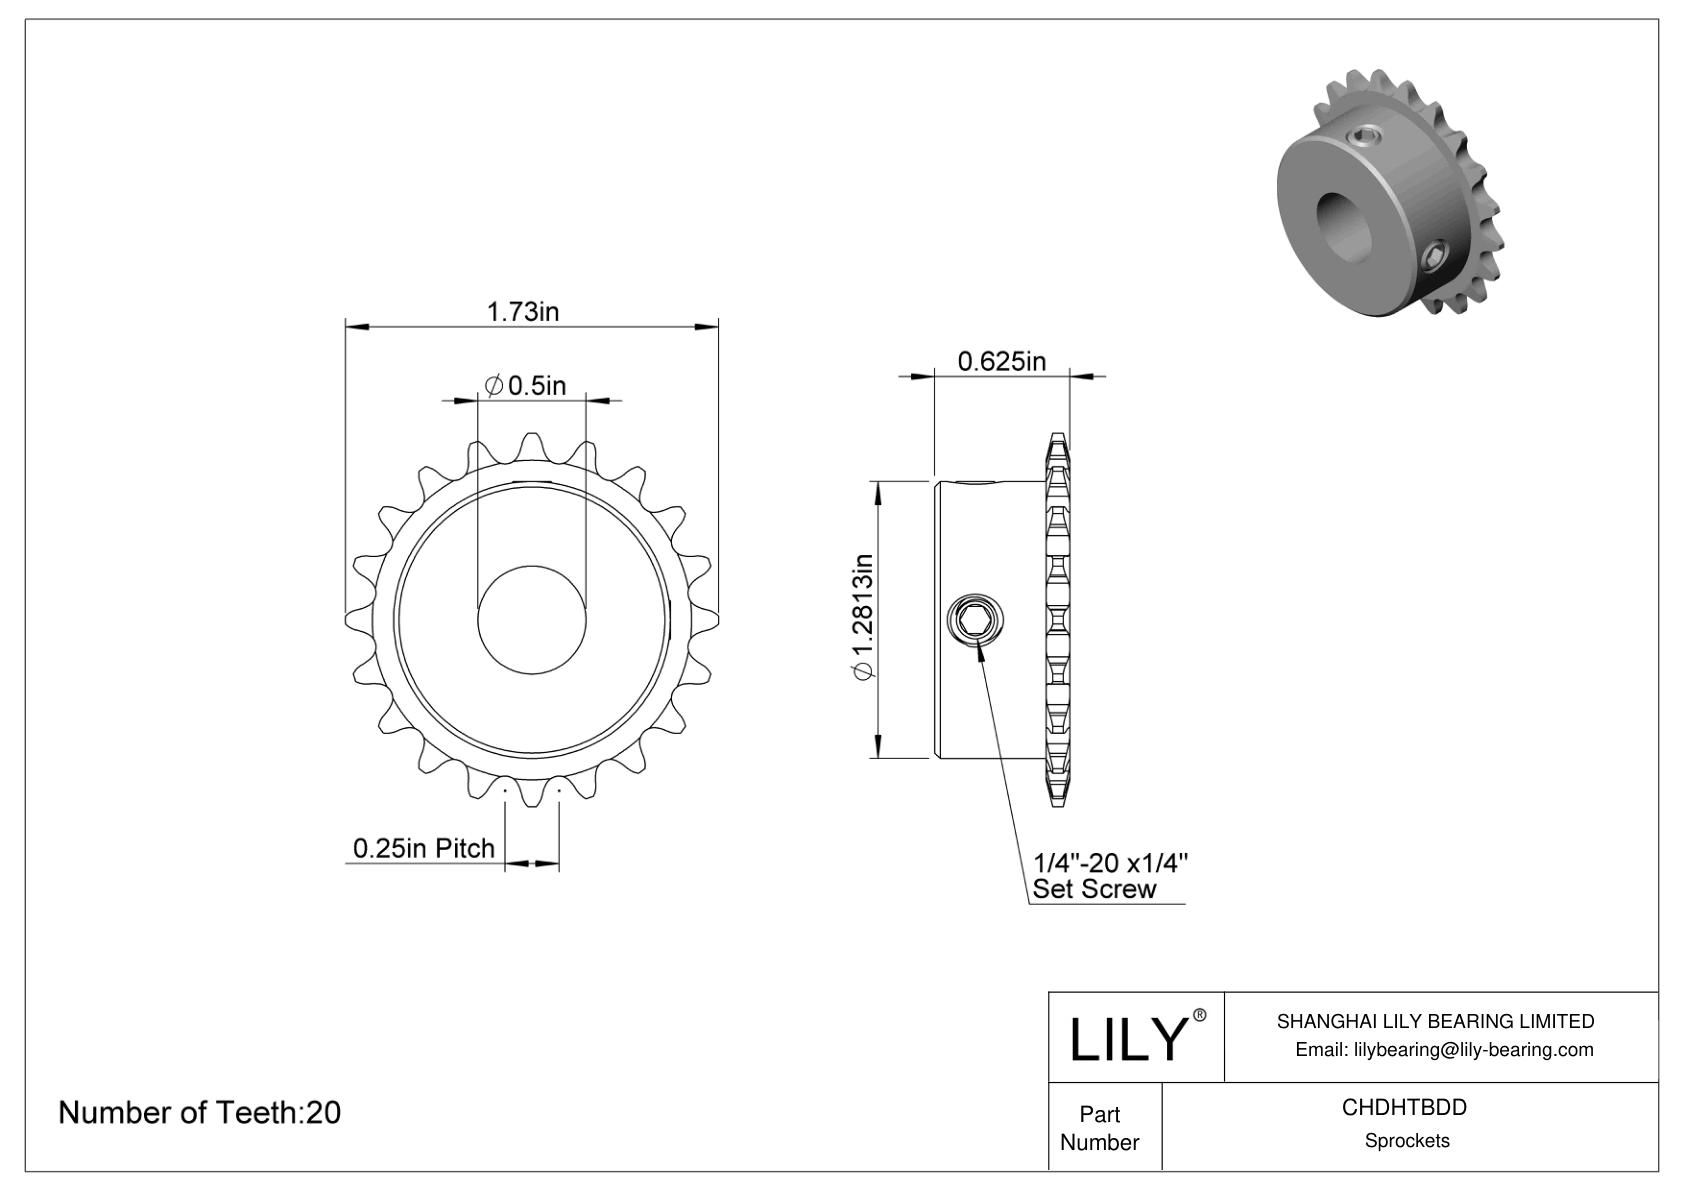 CHDHTBDD Sprockets for ANSI Roller Chain cad drawing